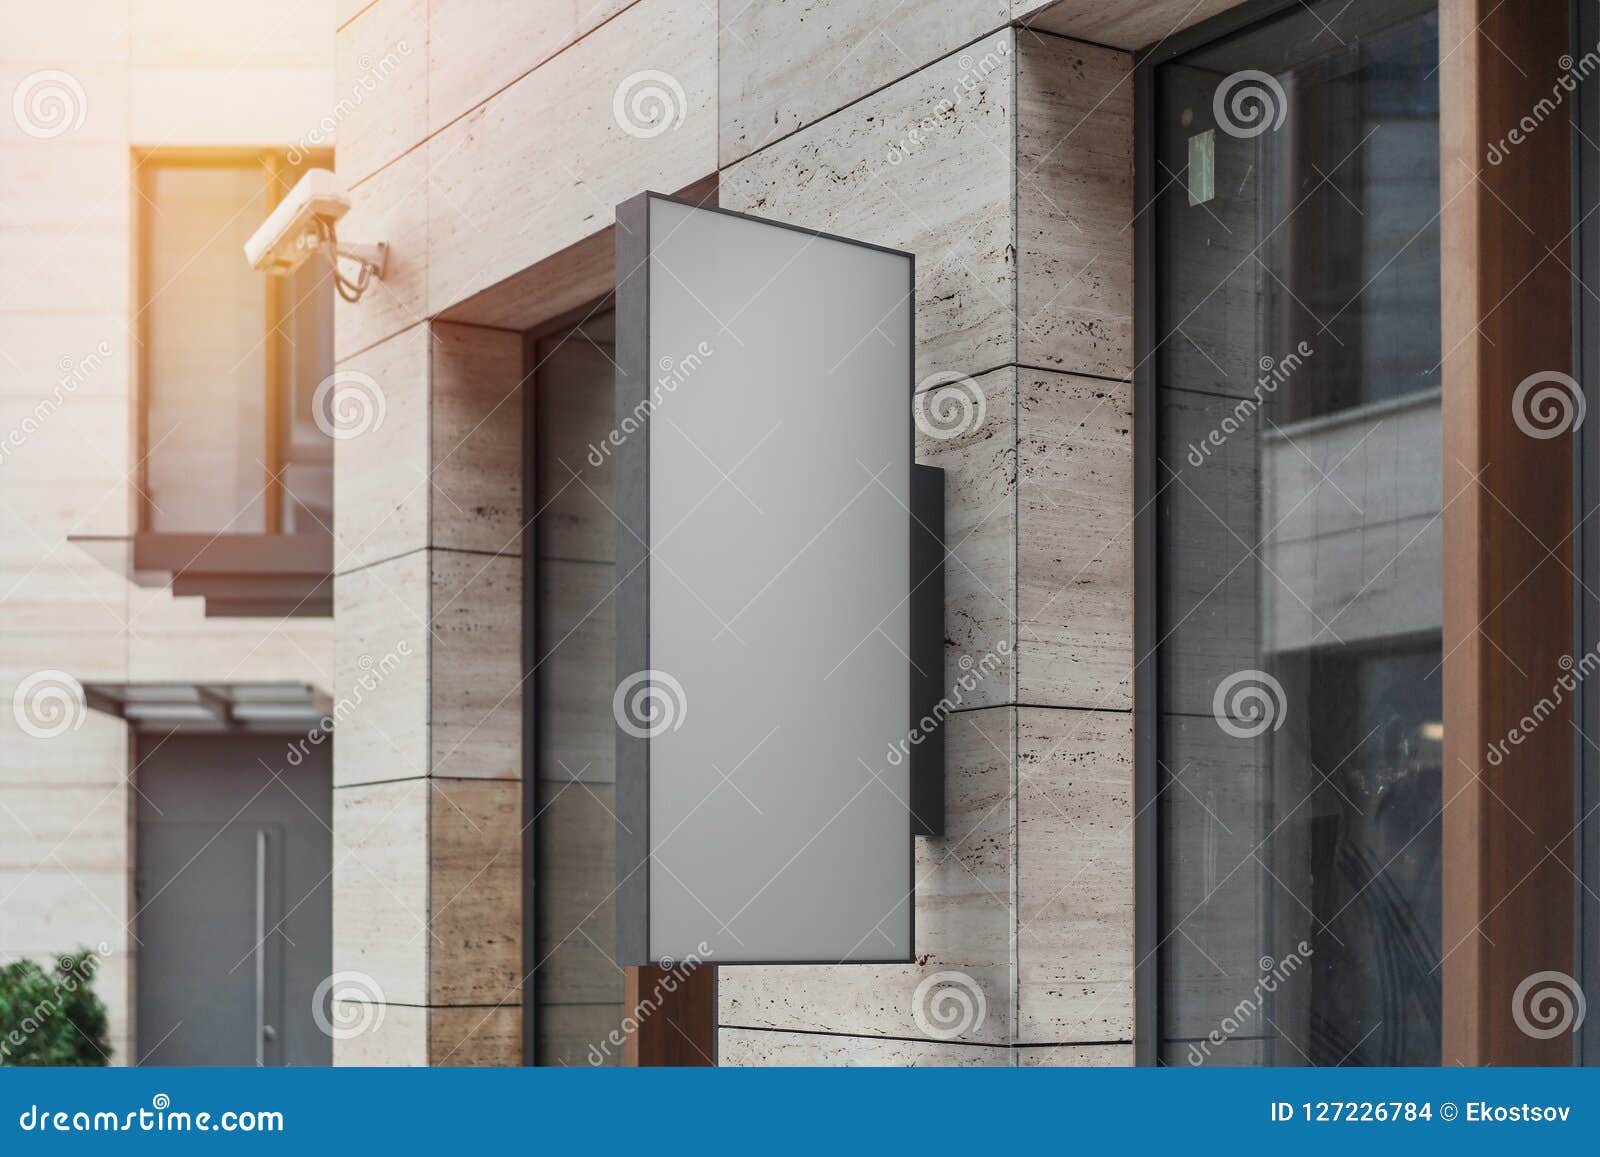 Download Blank Store Signboard Empty Shop Lightbox On The Wall 3d Rendering Stock Photo Image Of Advertise Company 127226784